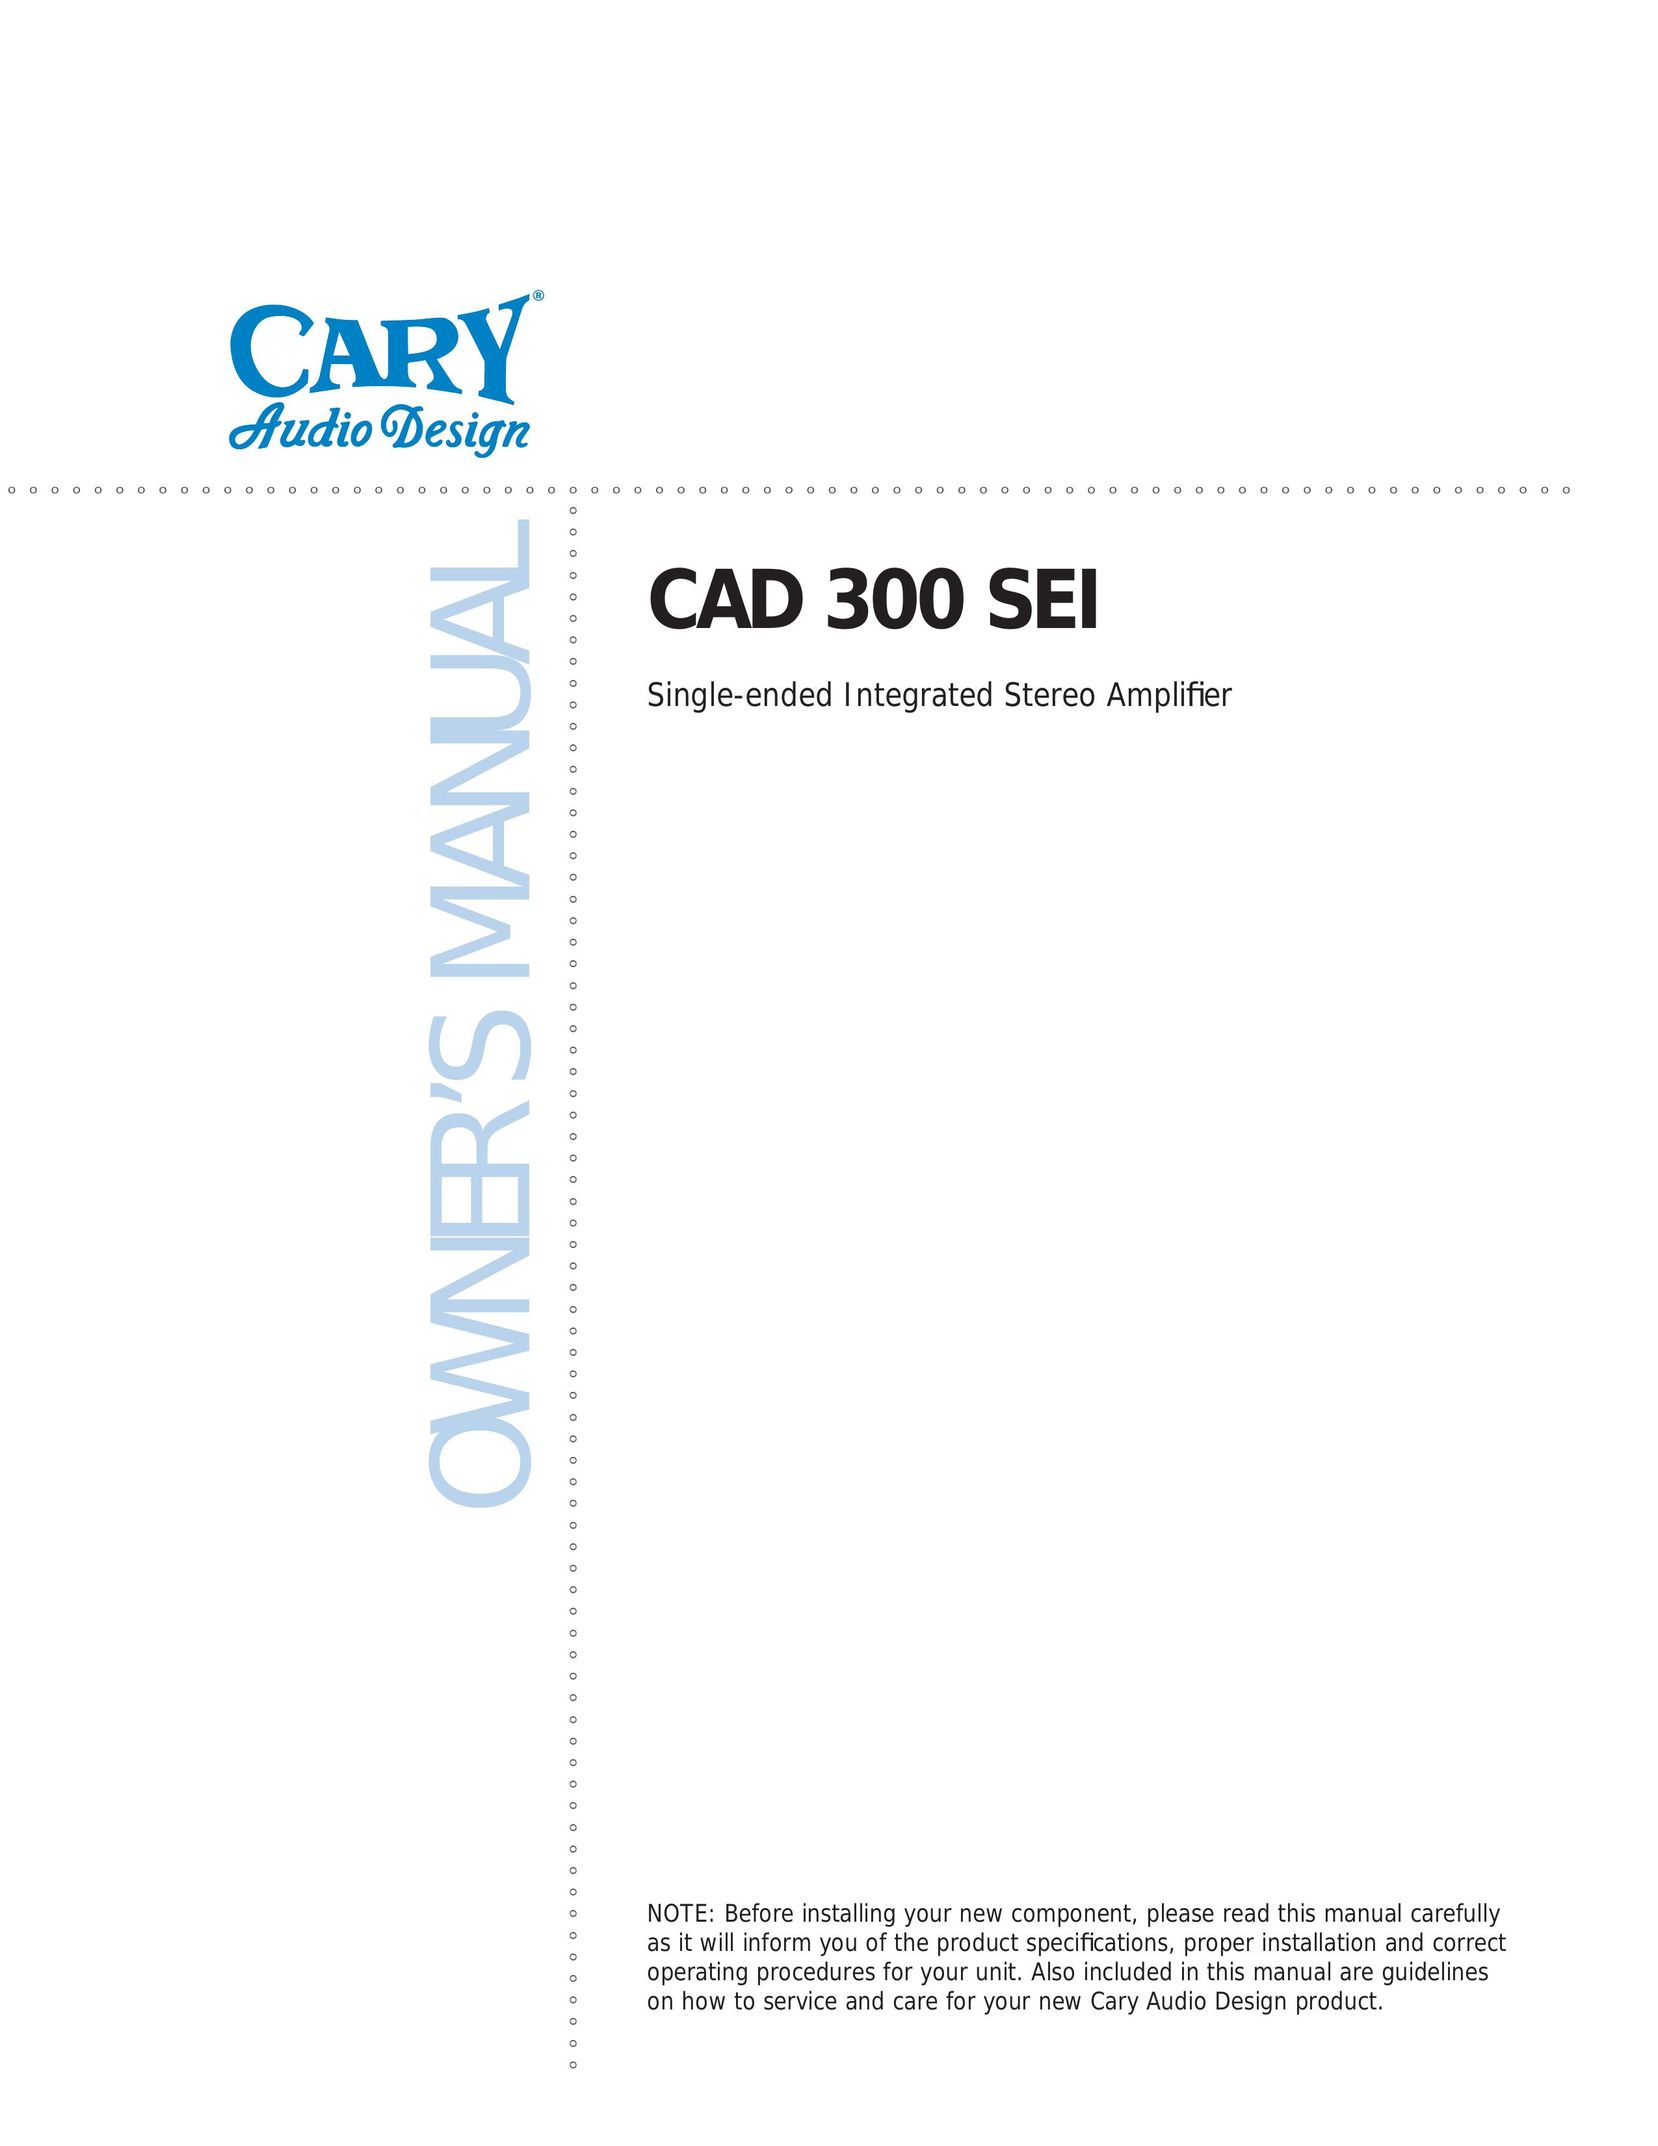 Cary Audio Design CAD 300 Stereo Amplifier User Manual